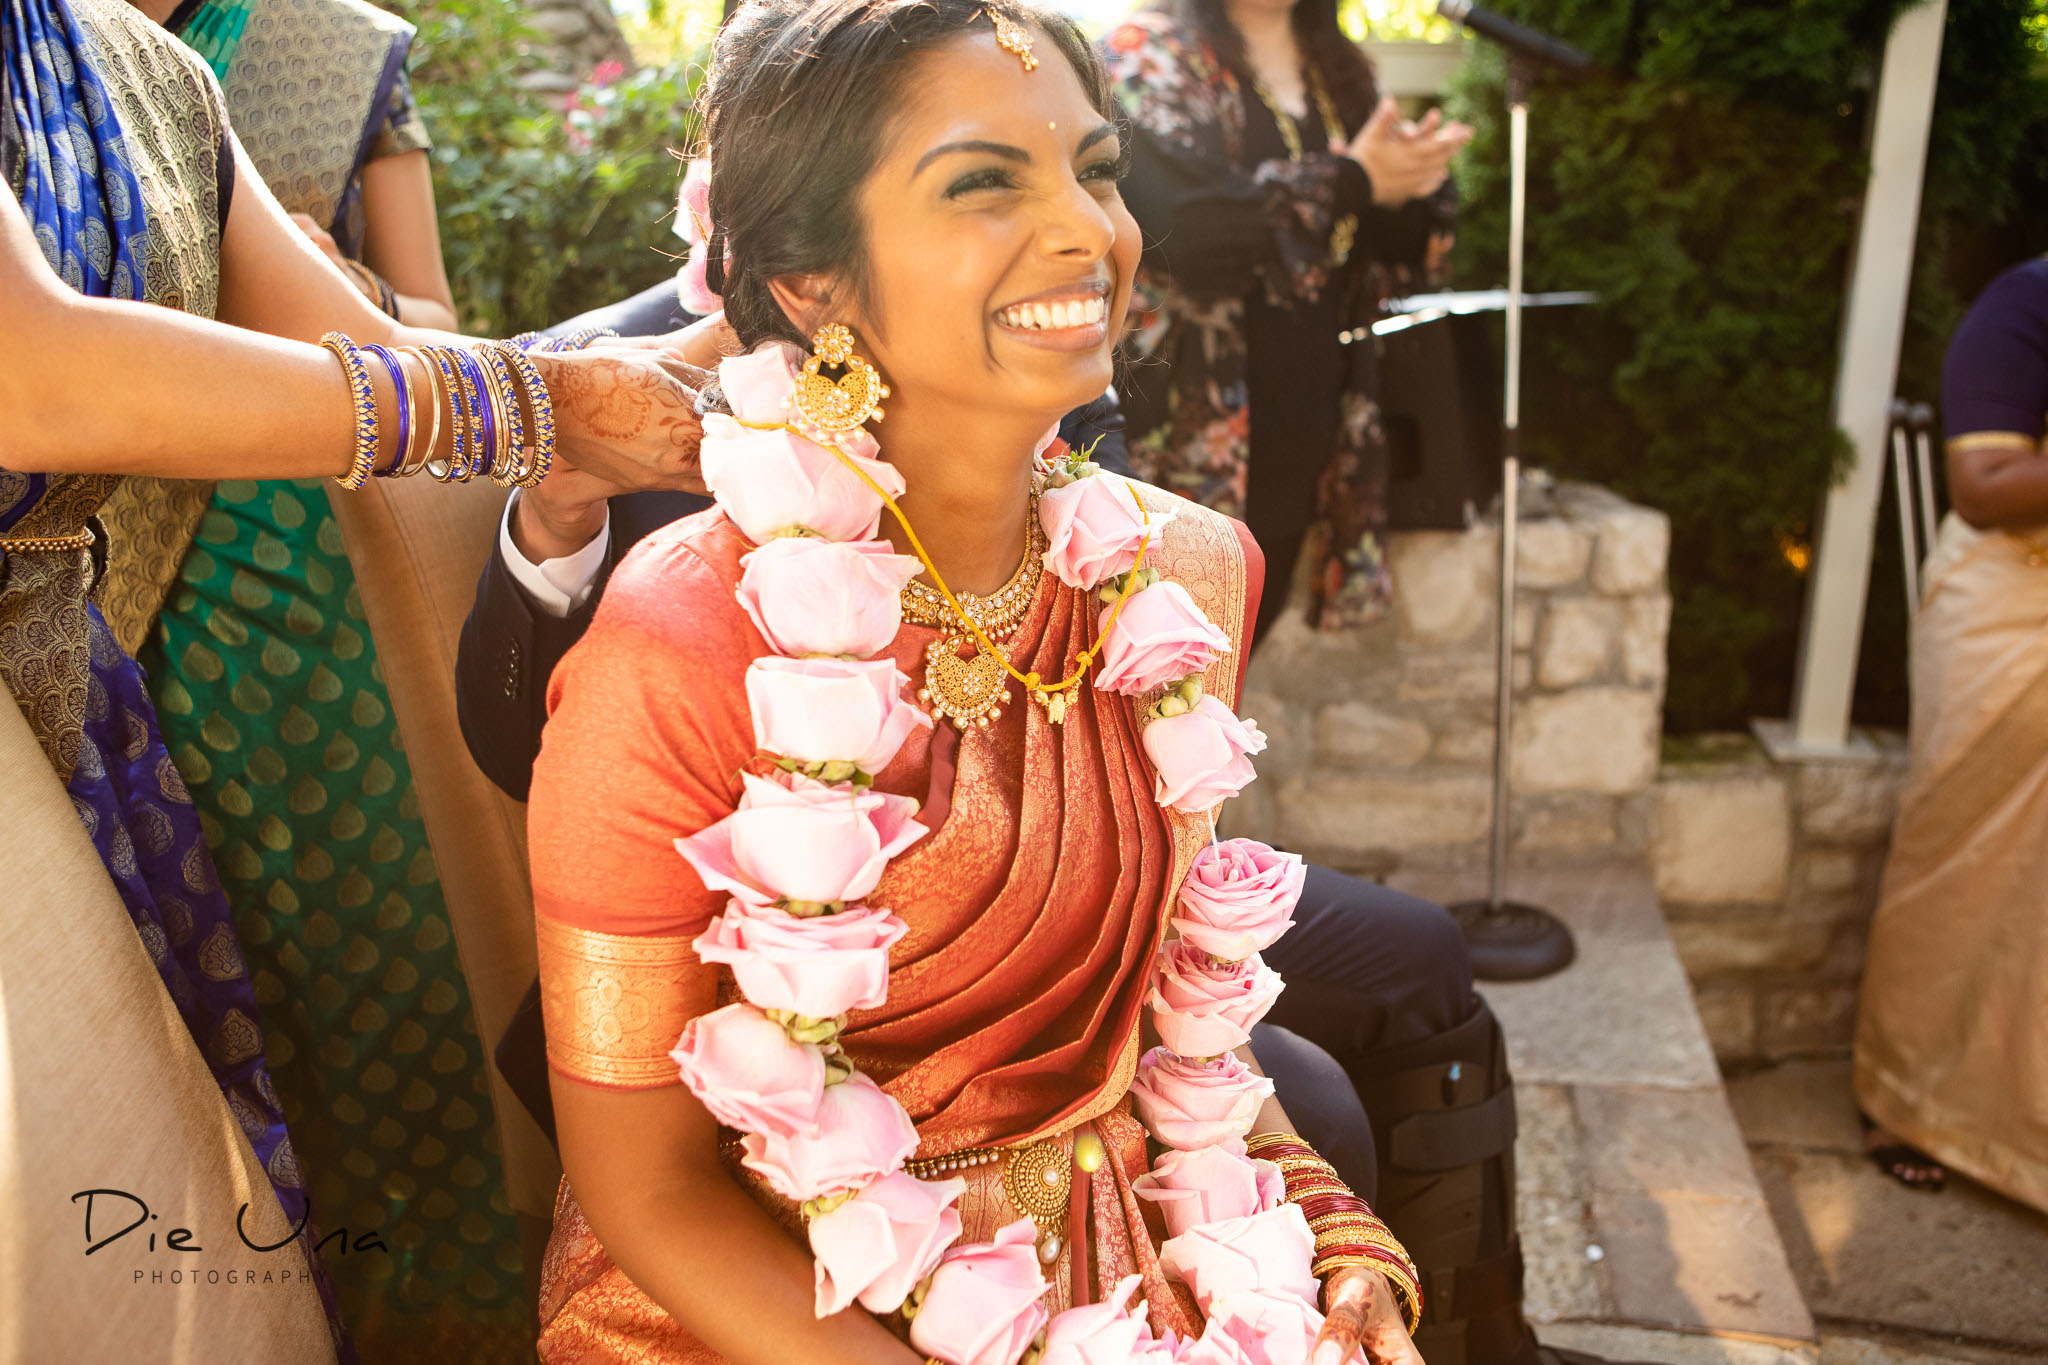 happy bride during the tying of the thaali during Sri Lankan wedding ceremony.jpg